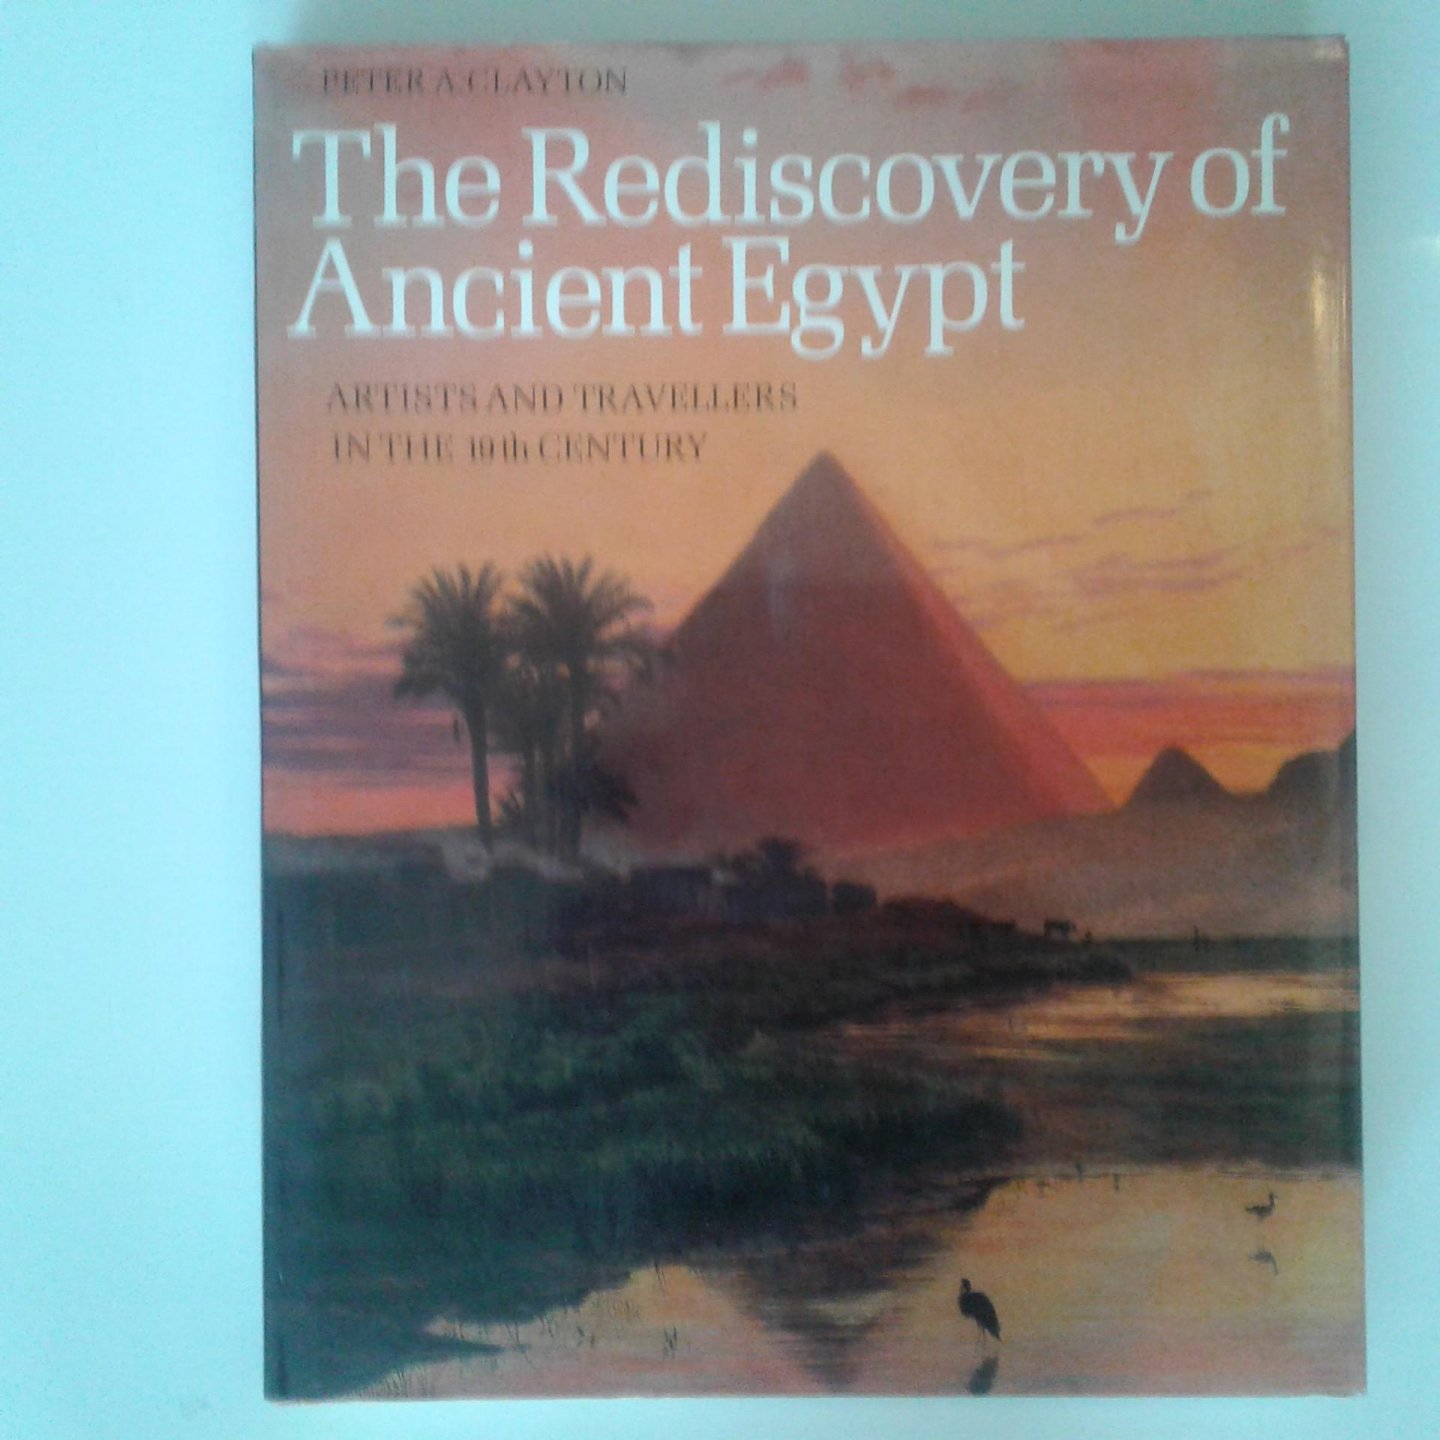 Clayton, Peter A. - The rediscovery of Ancient Egypt ; Artists and travellers in the 19th century